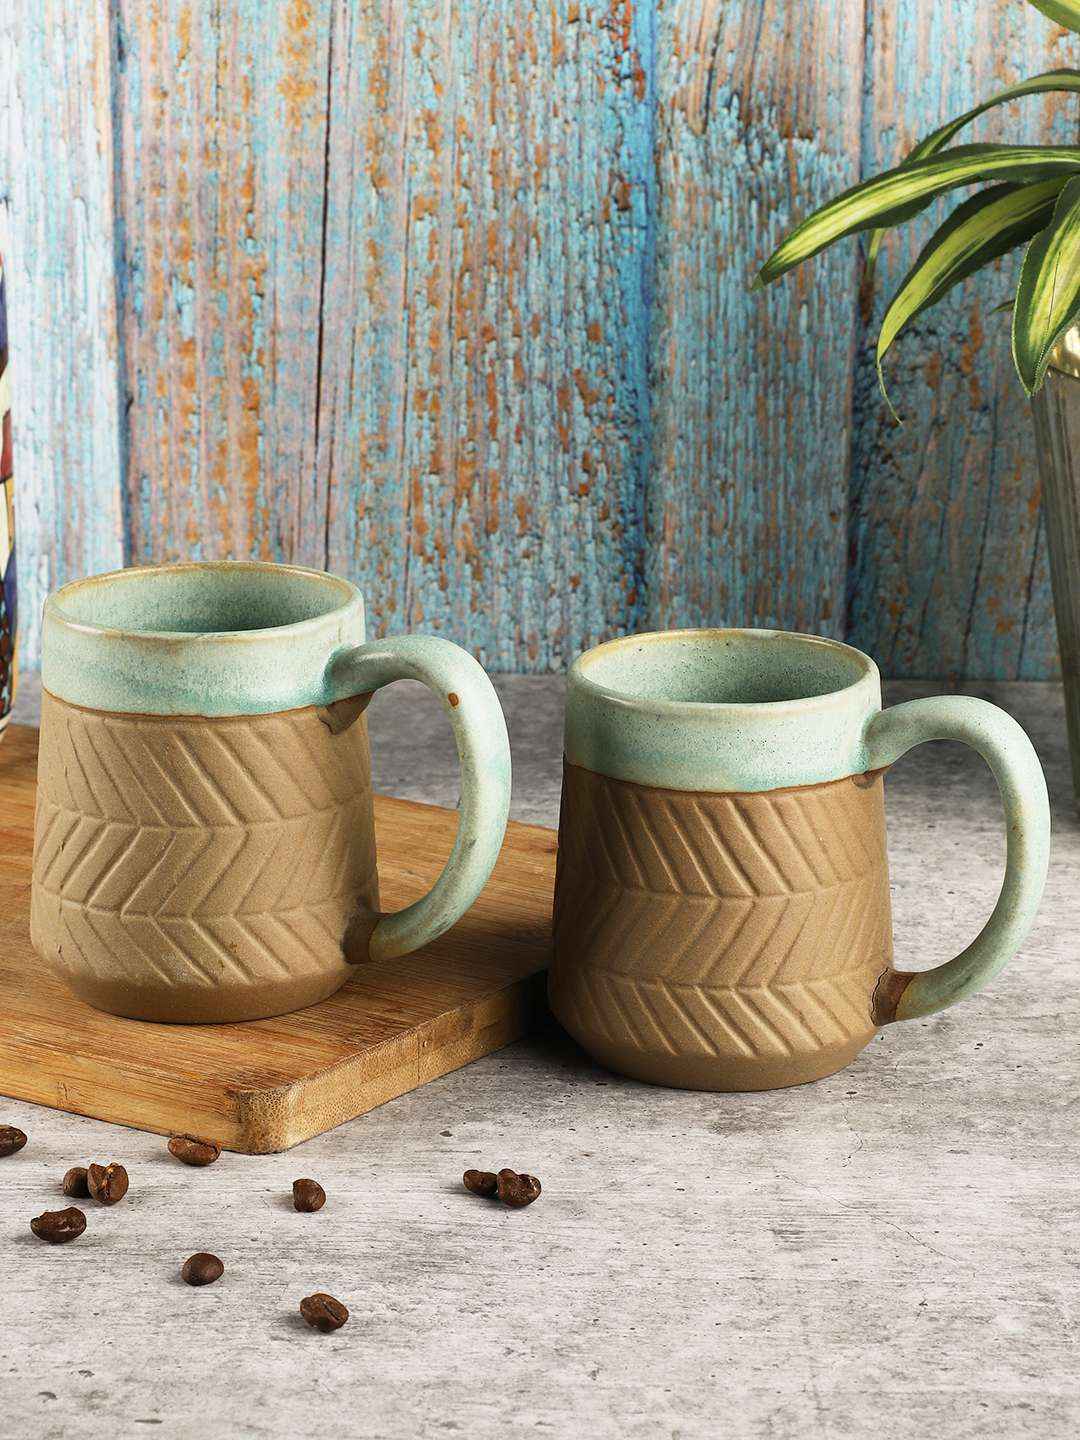 Monique Spotted Ceramic Cup with Golden Handle - Set of 2